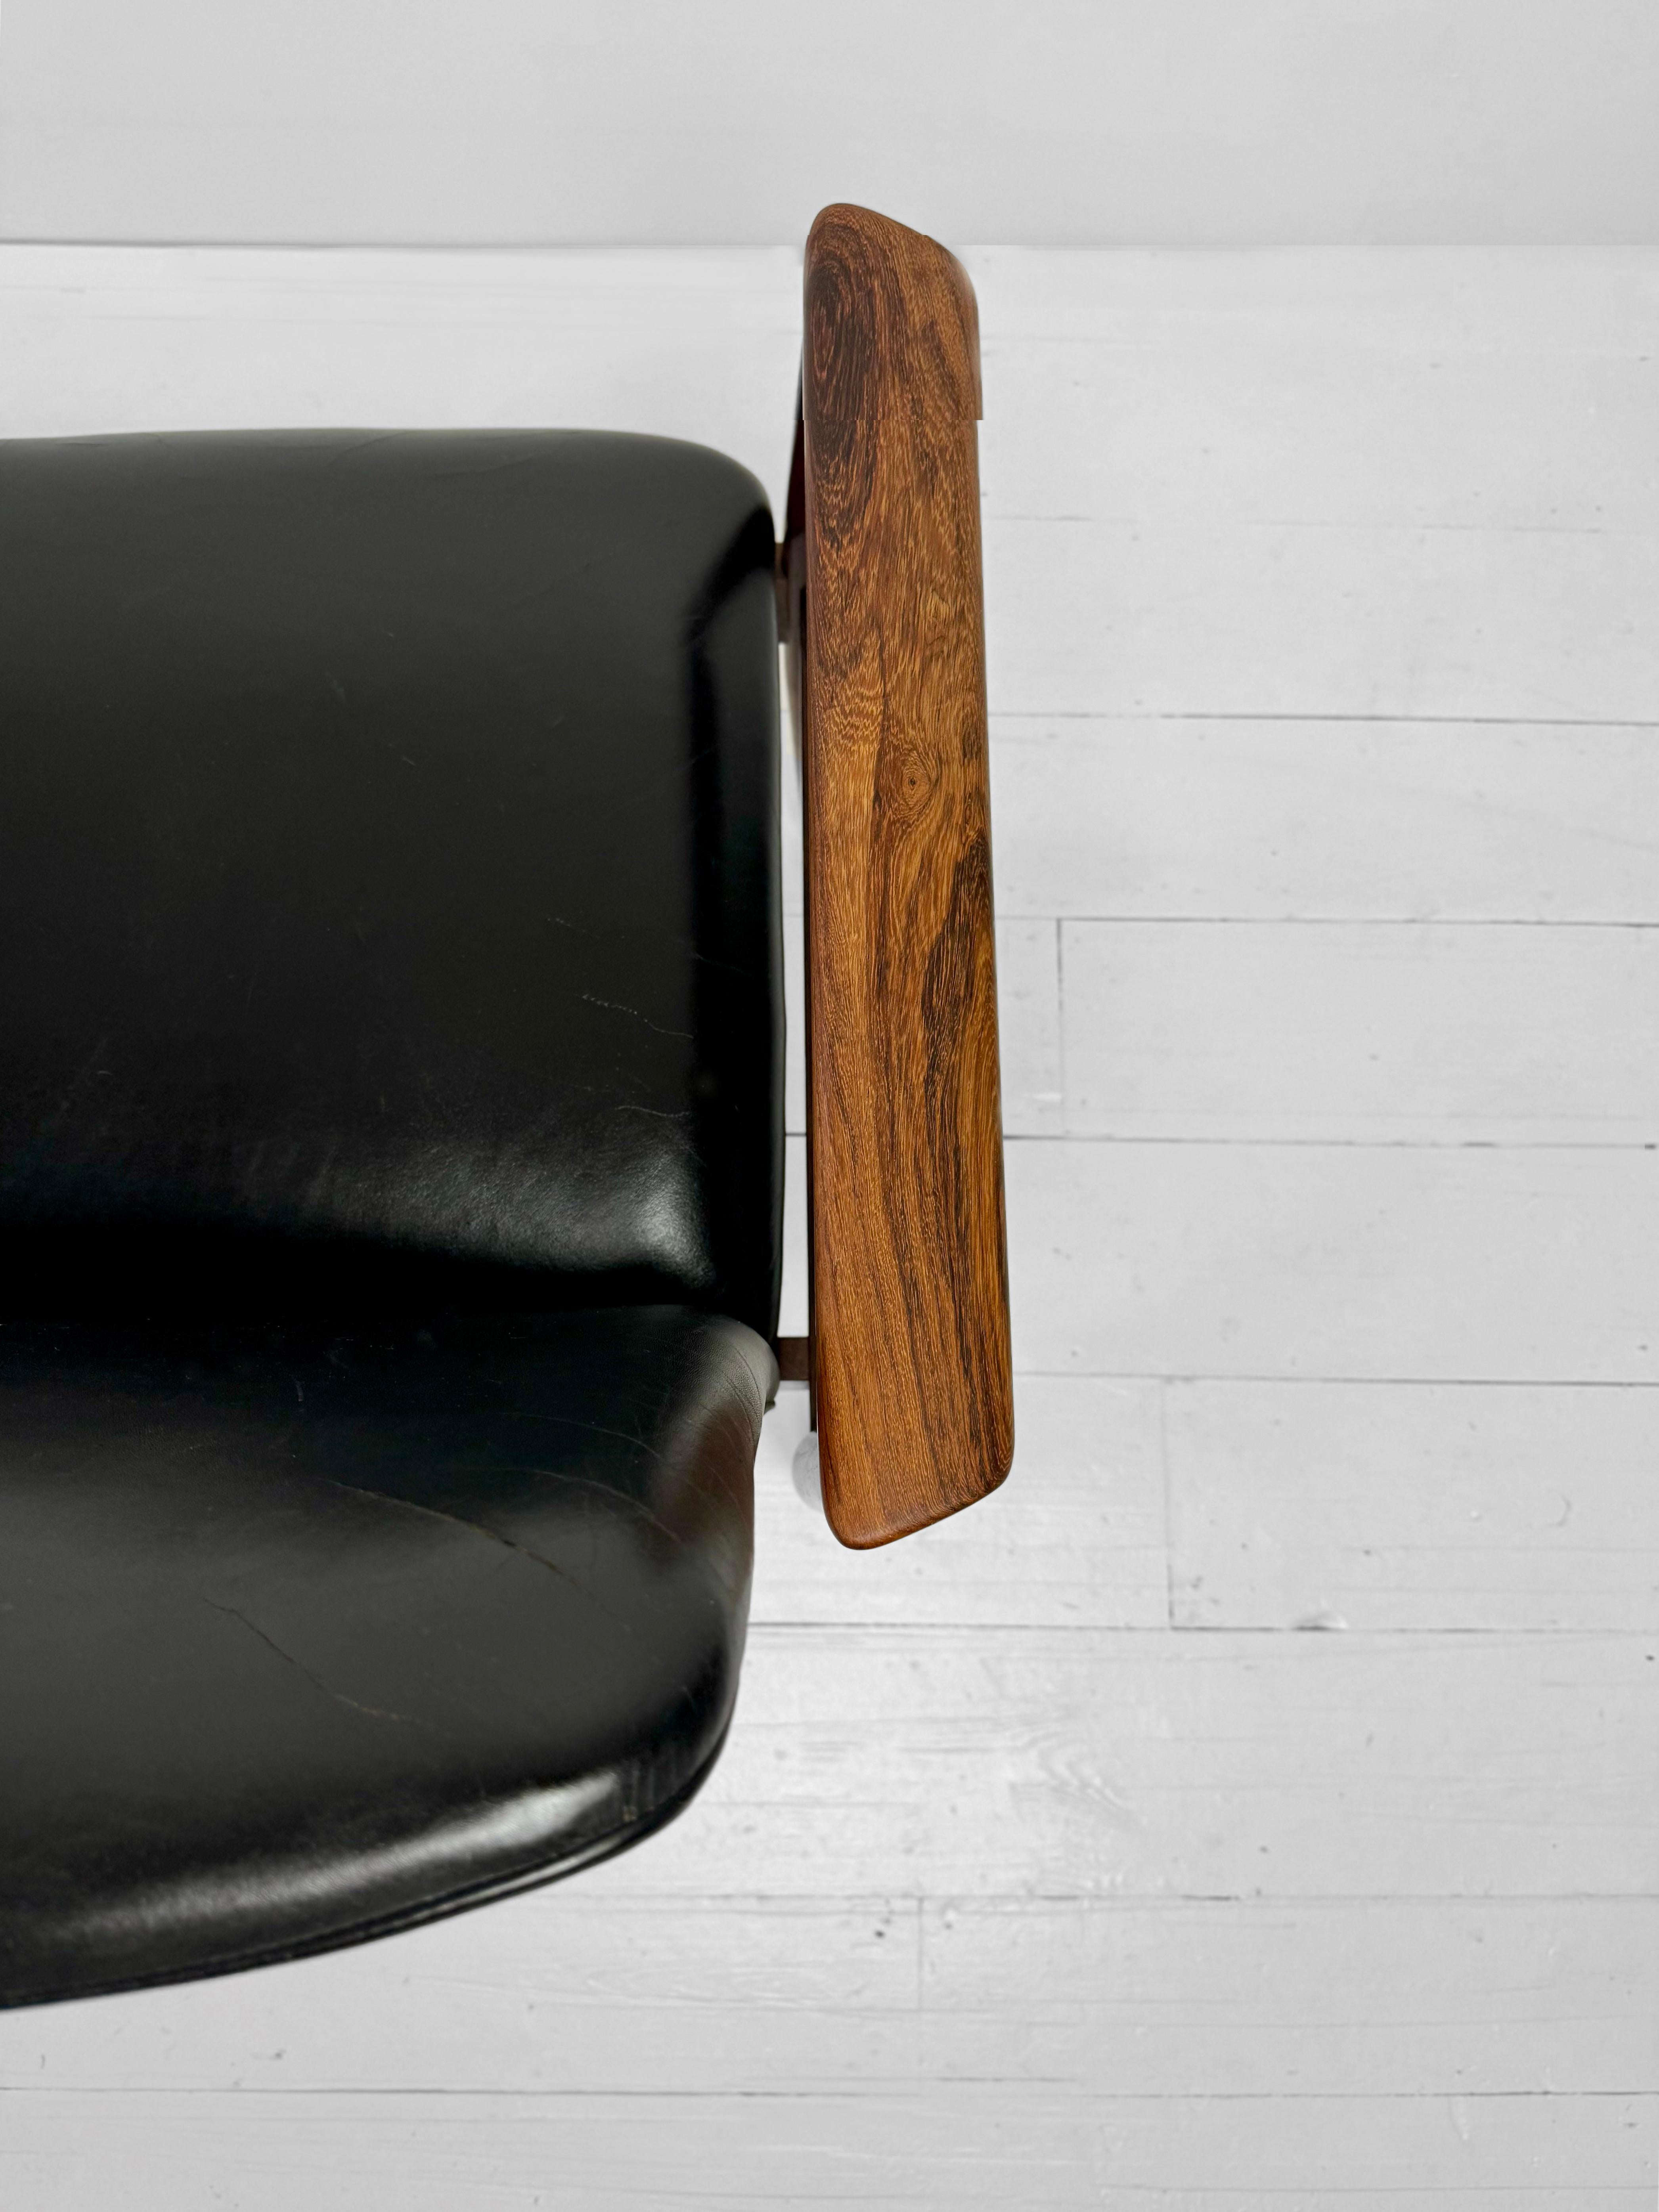 Set of Diplomat Armchairs in Rosewood and Leather by Finn Juhl, Denmark c.1960's For Sale 4